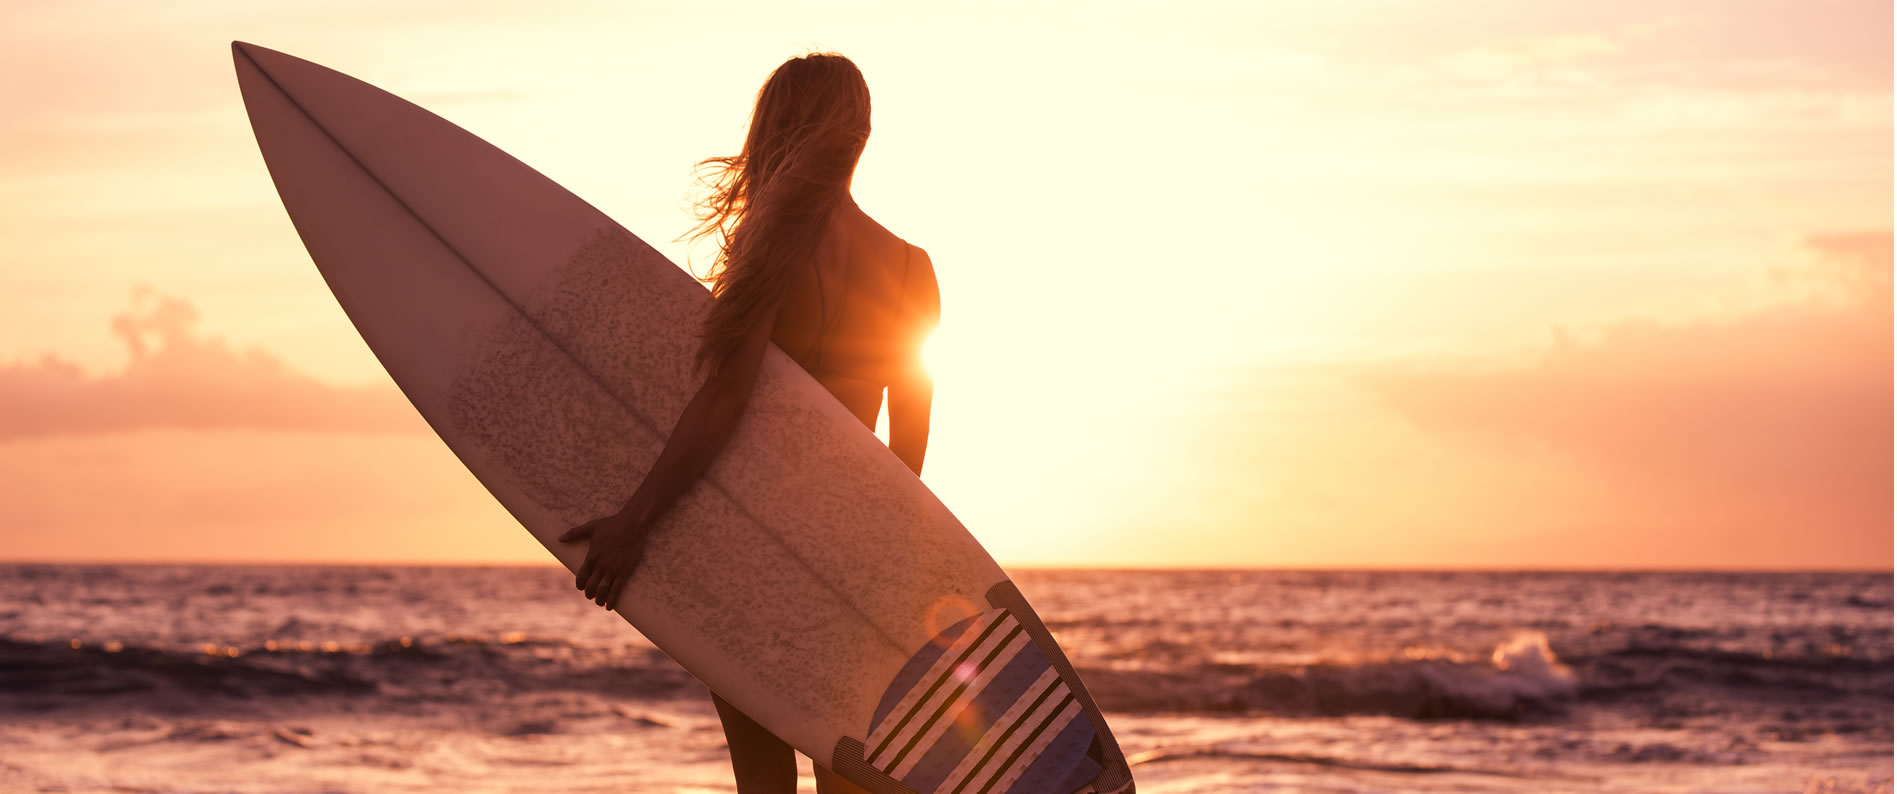 Photo of a girl on the beach holding a surf board